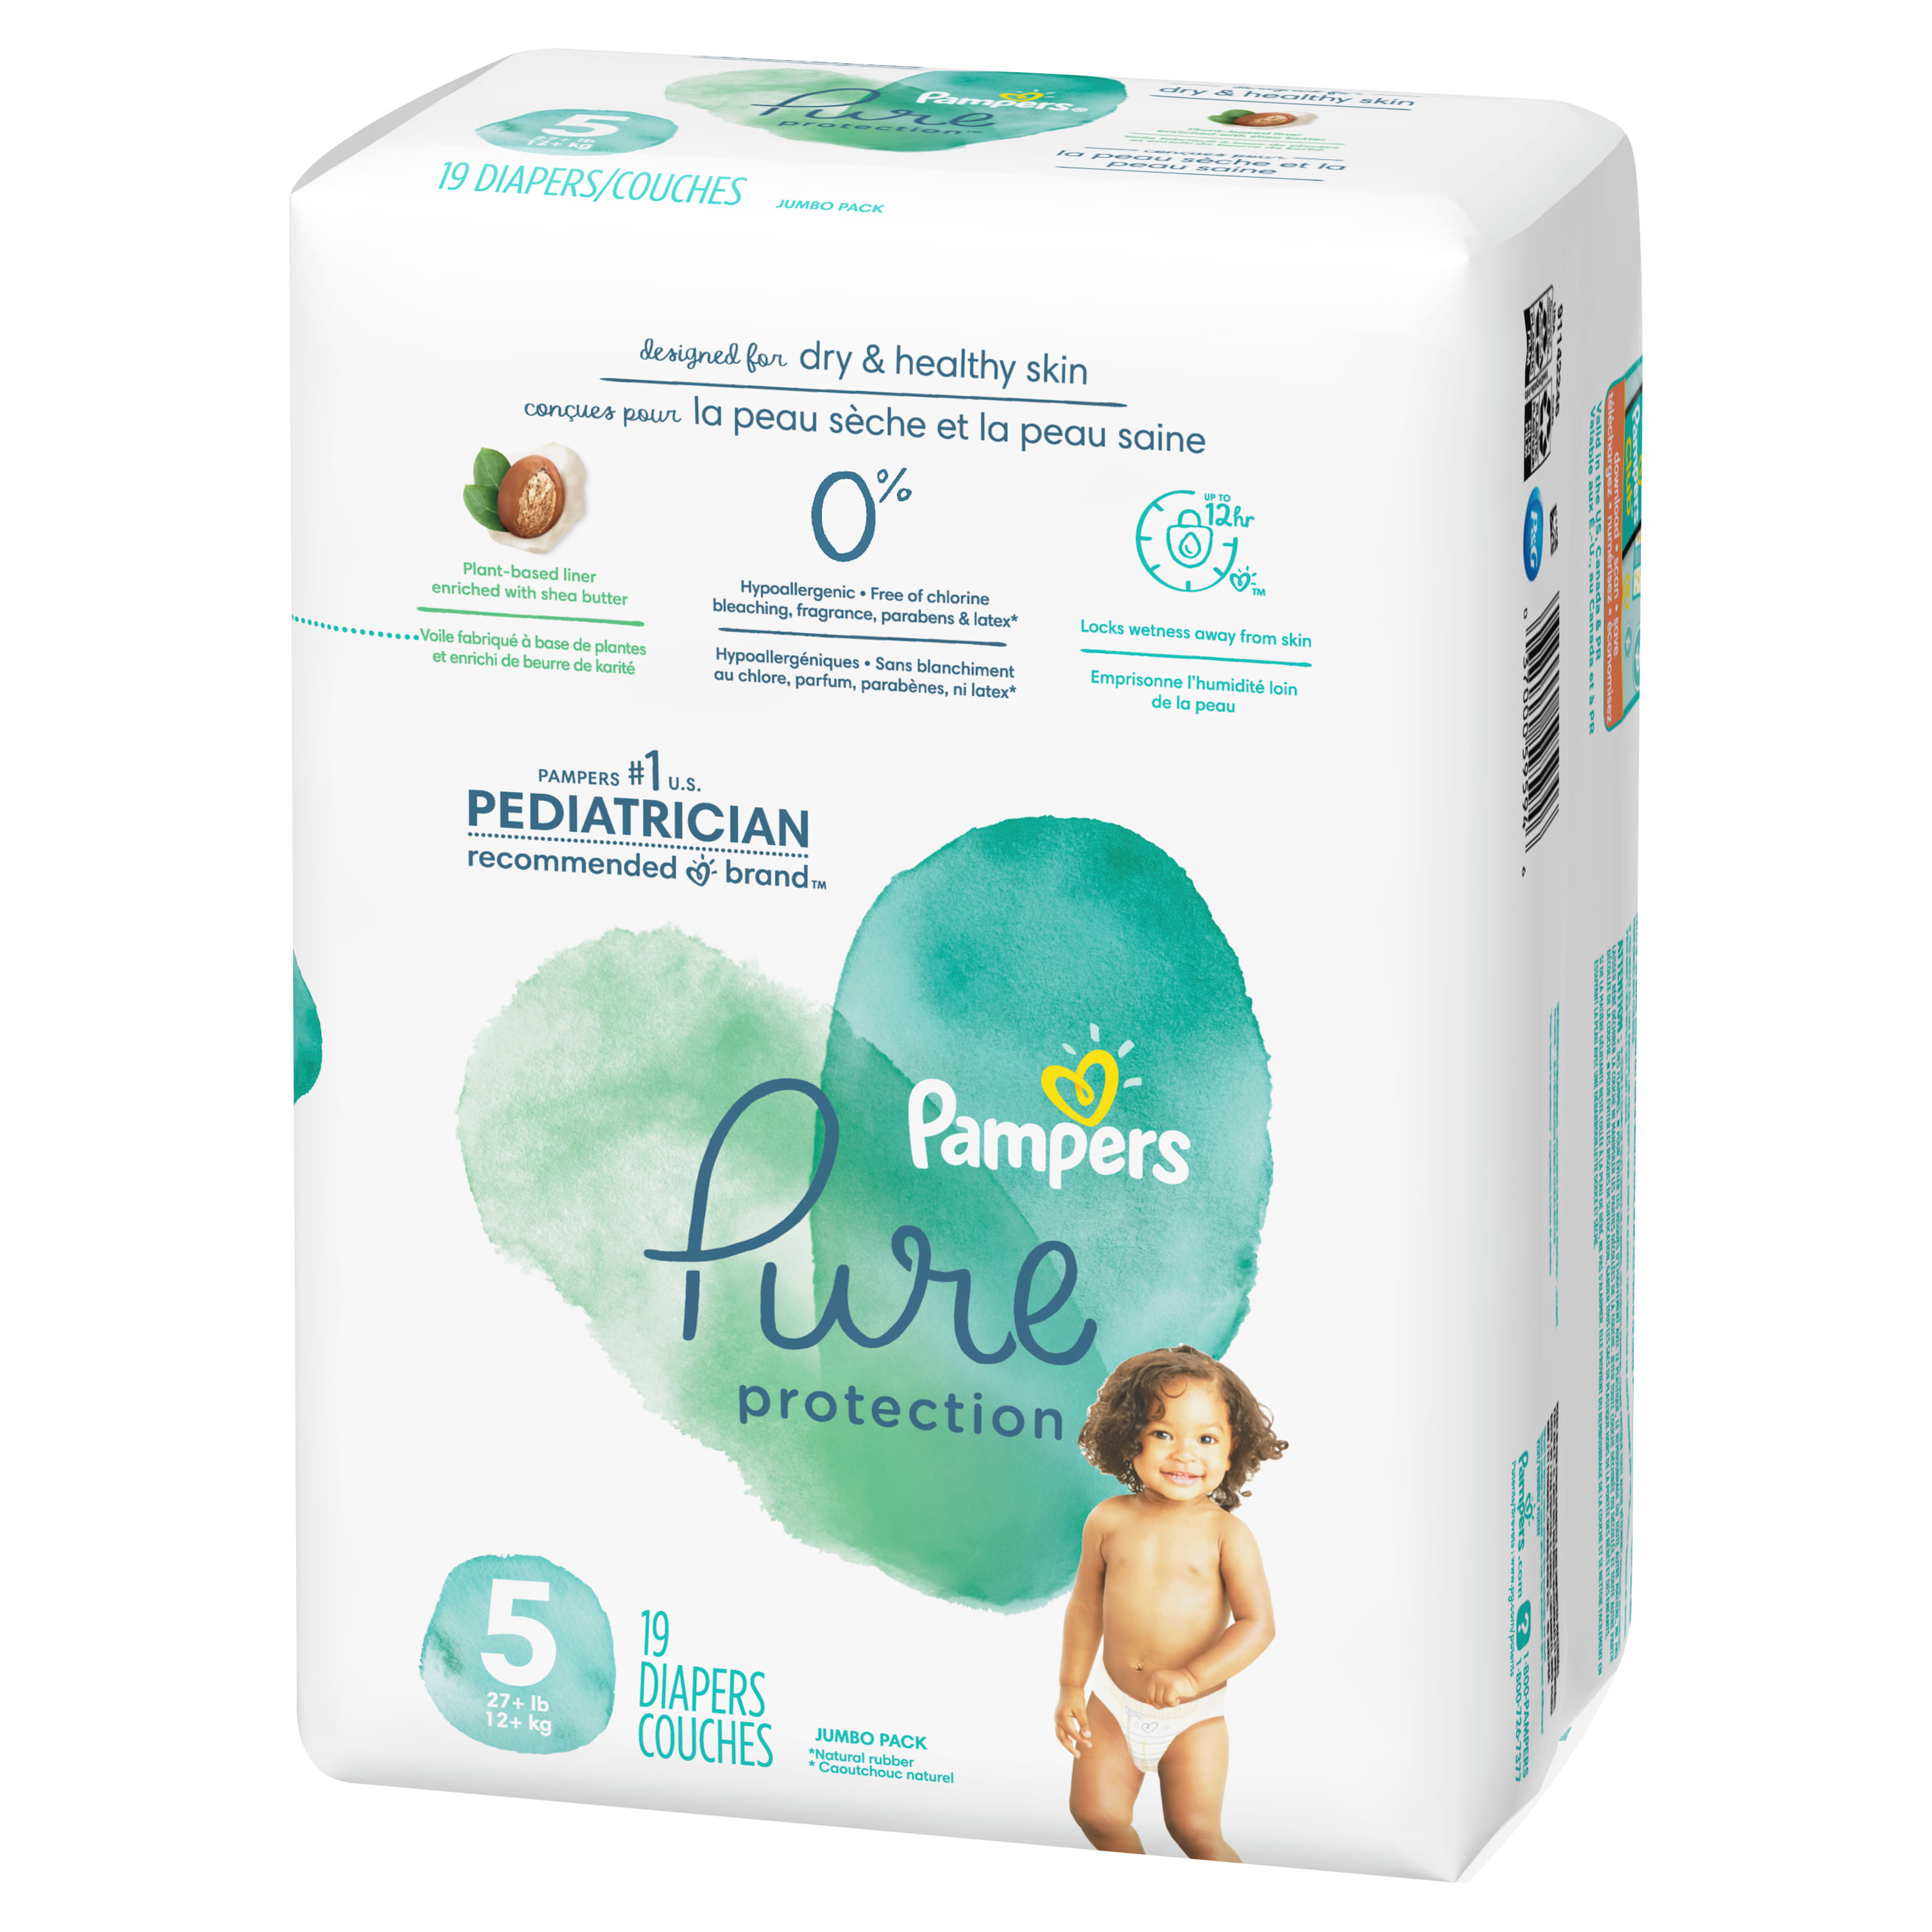 Pampers Pure Protection - Pañales desechables, talla 5, 19 unidades